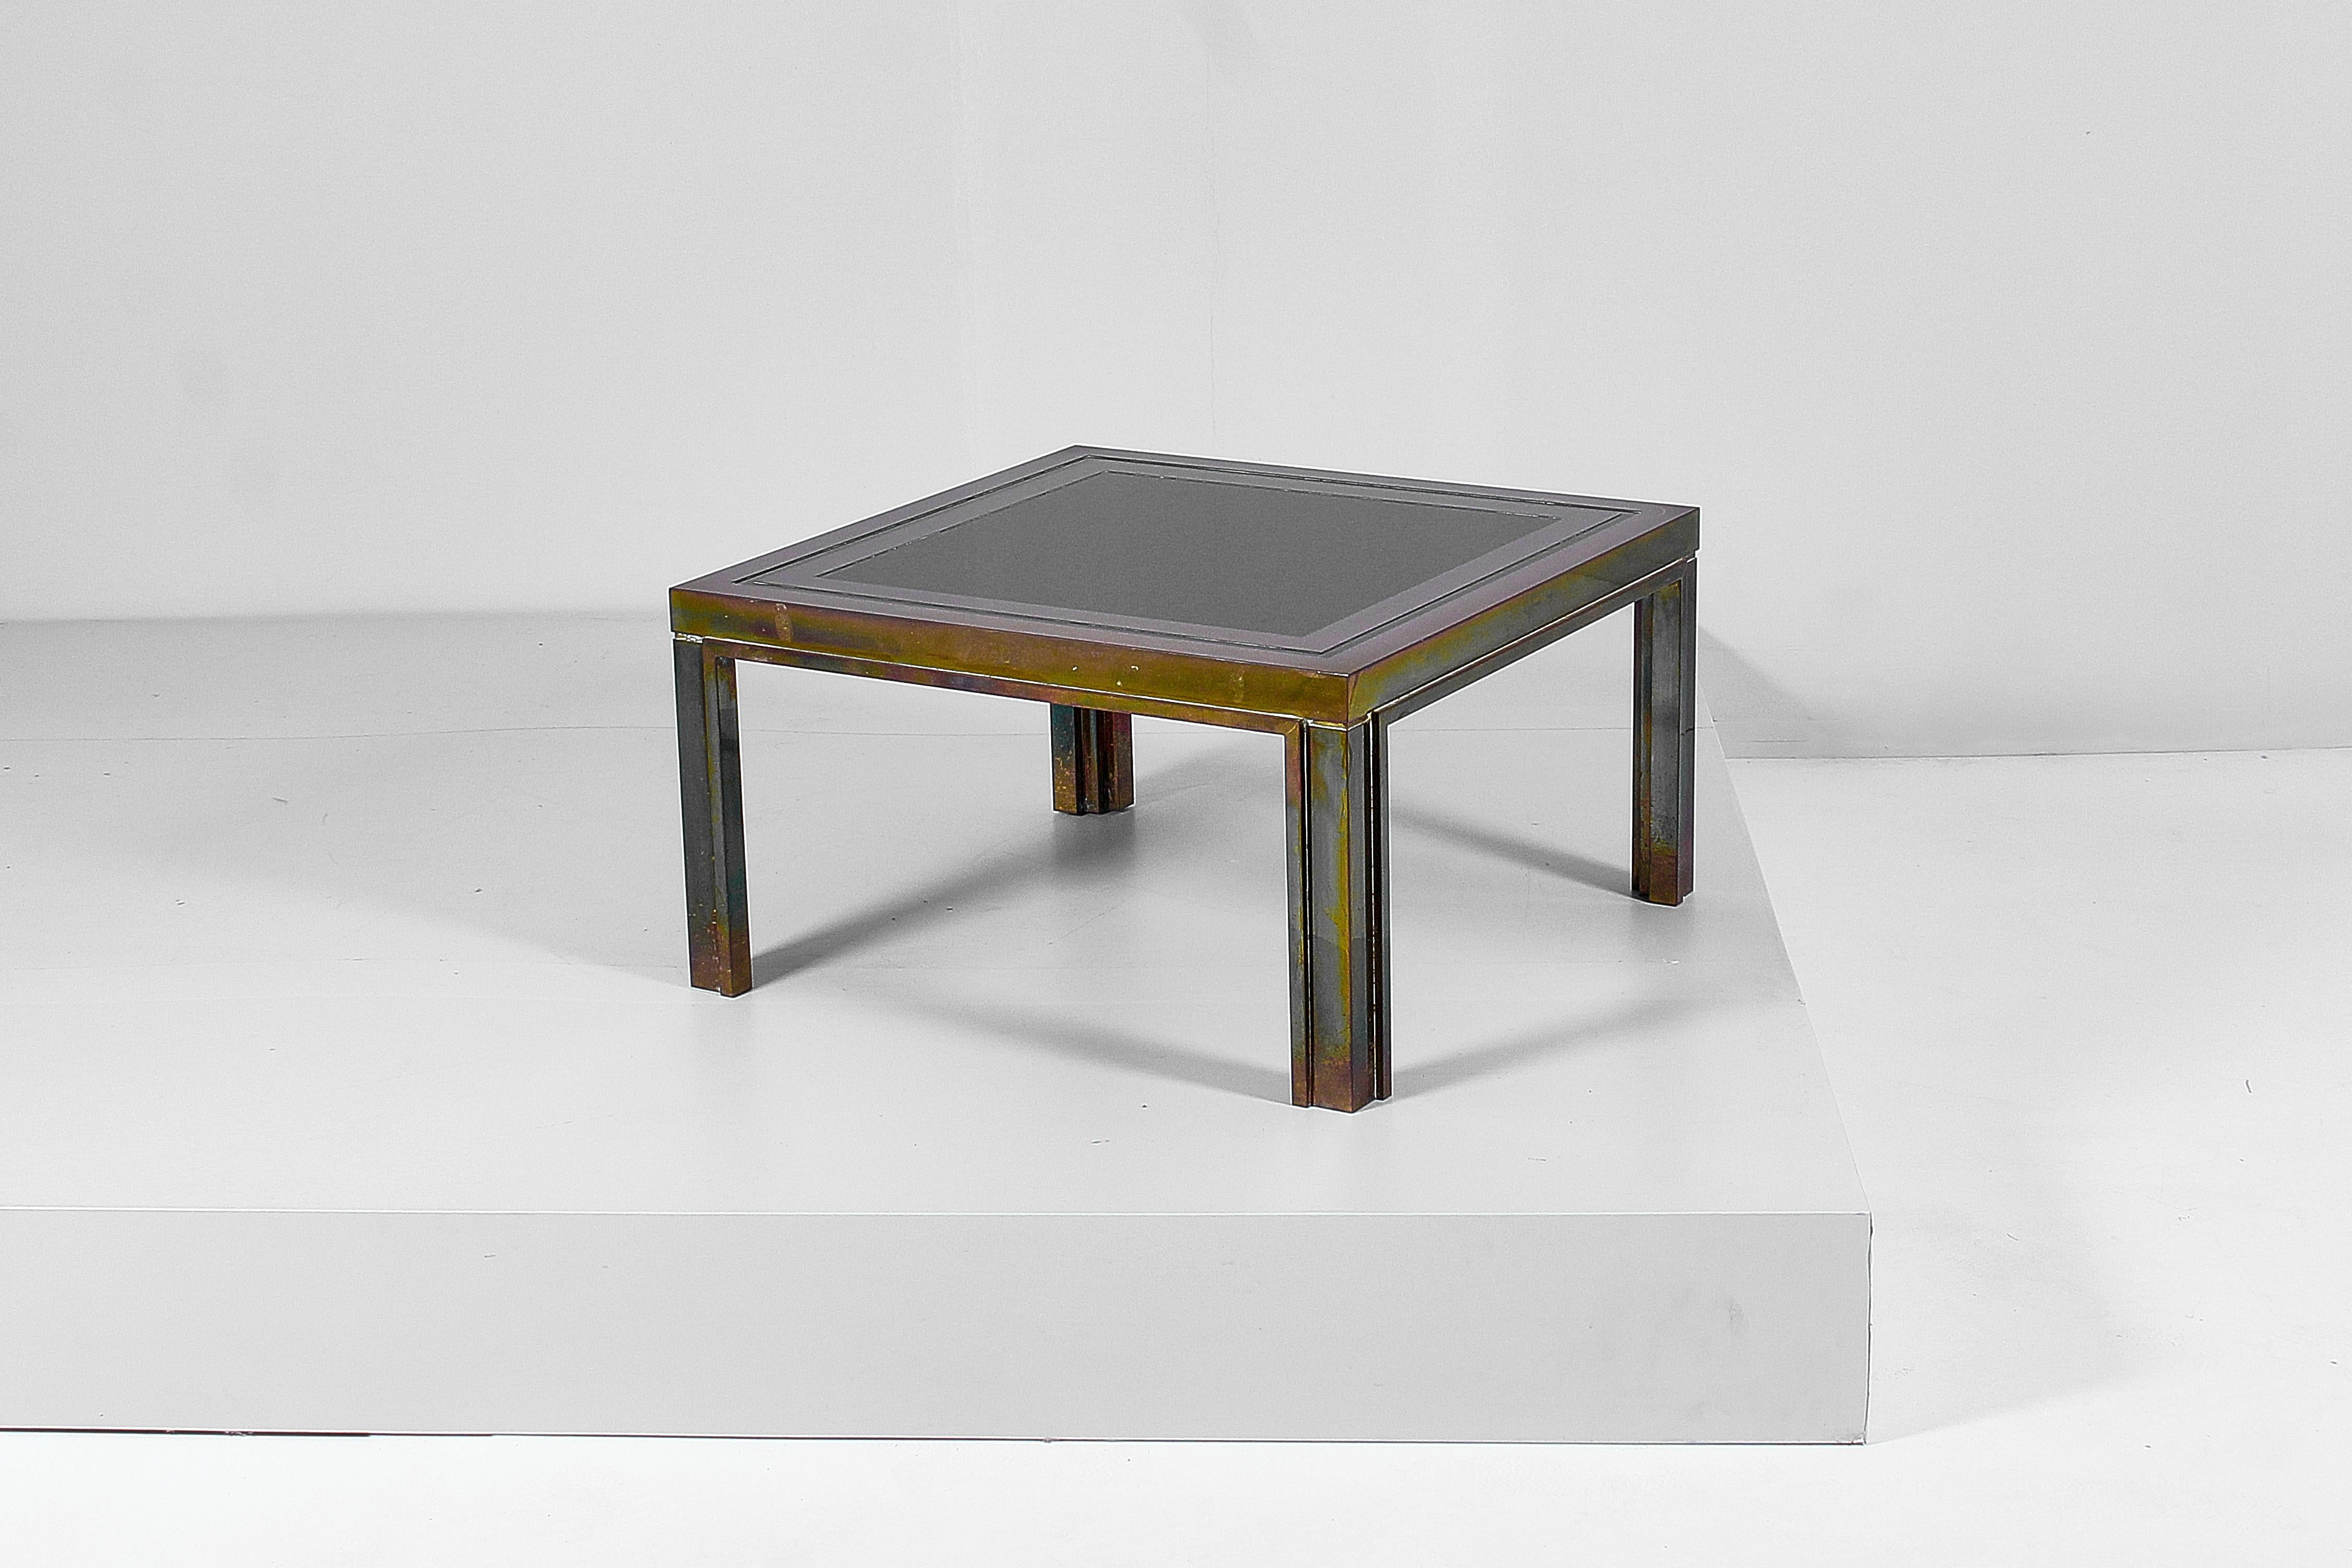 Late 20th Century Midcentury Maison Jansen Brass and Dark Glass Coffee Table 70s, France For Sale